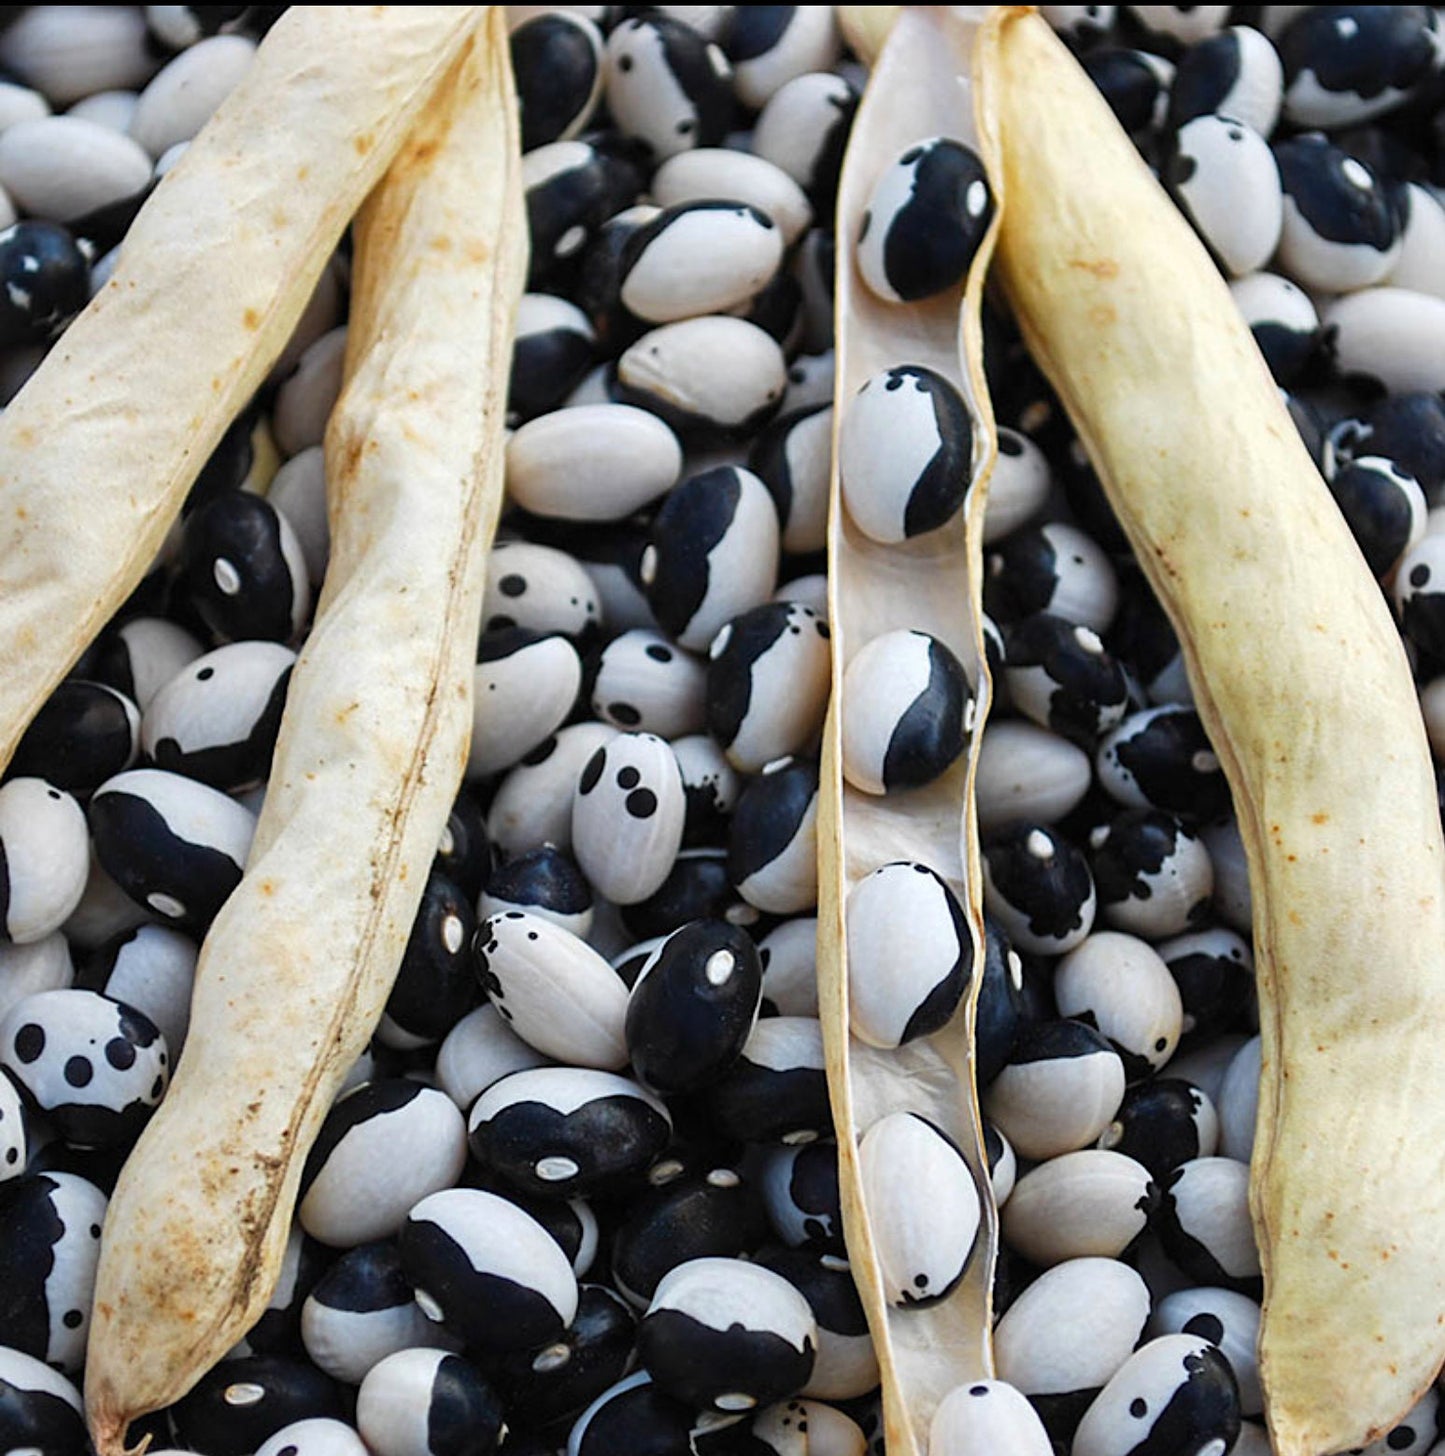 Calypso Bean seeds - Heirloom Untreated - Kid's Gardening project - Bush bean variety. Dry to keep. Nice baked or in soups